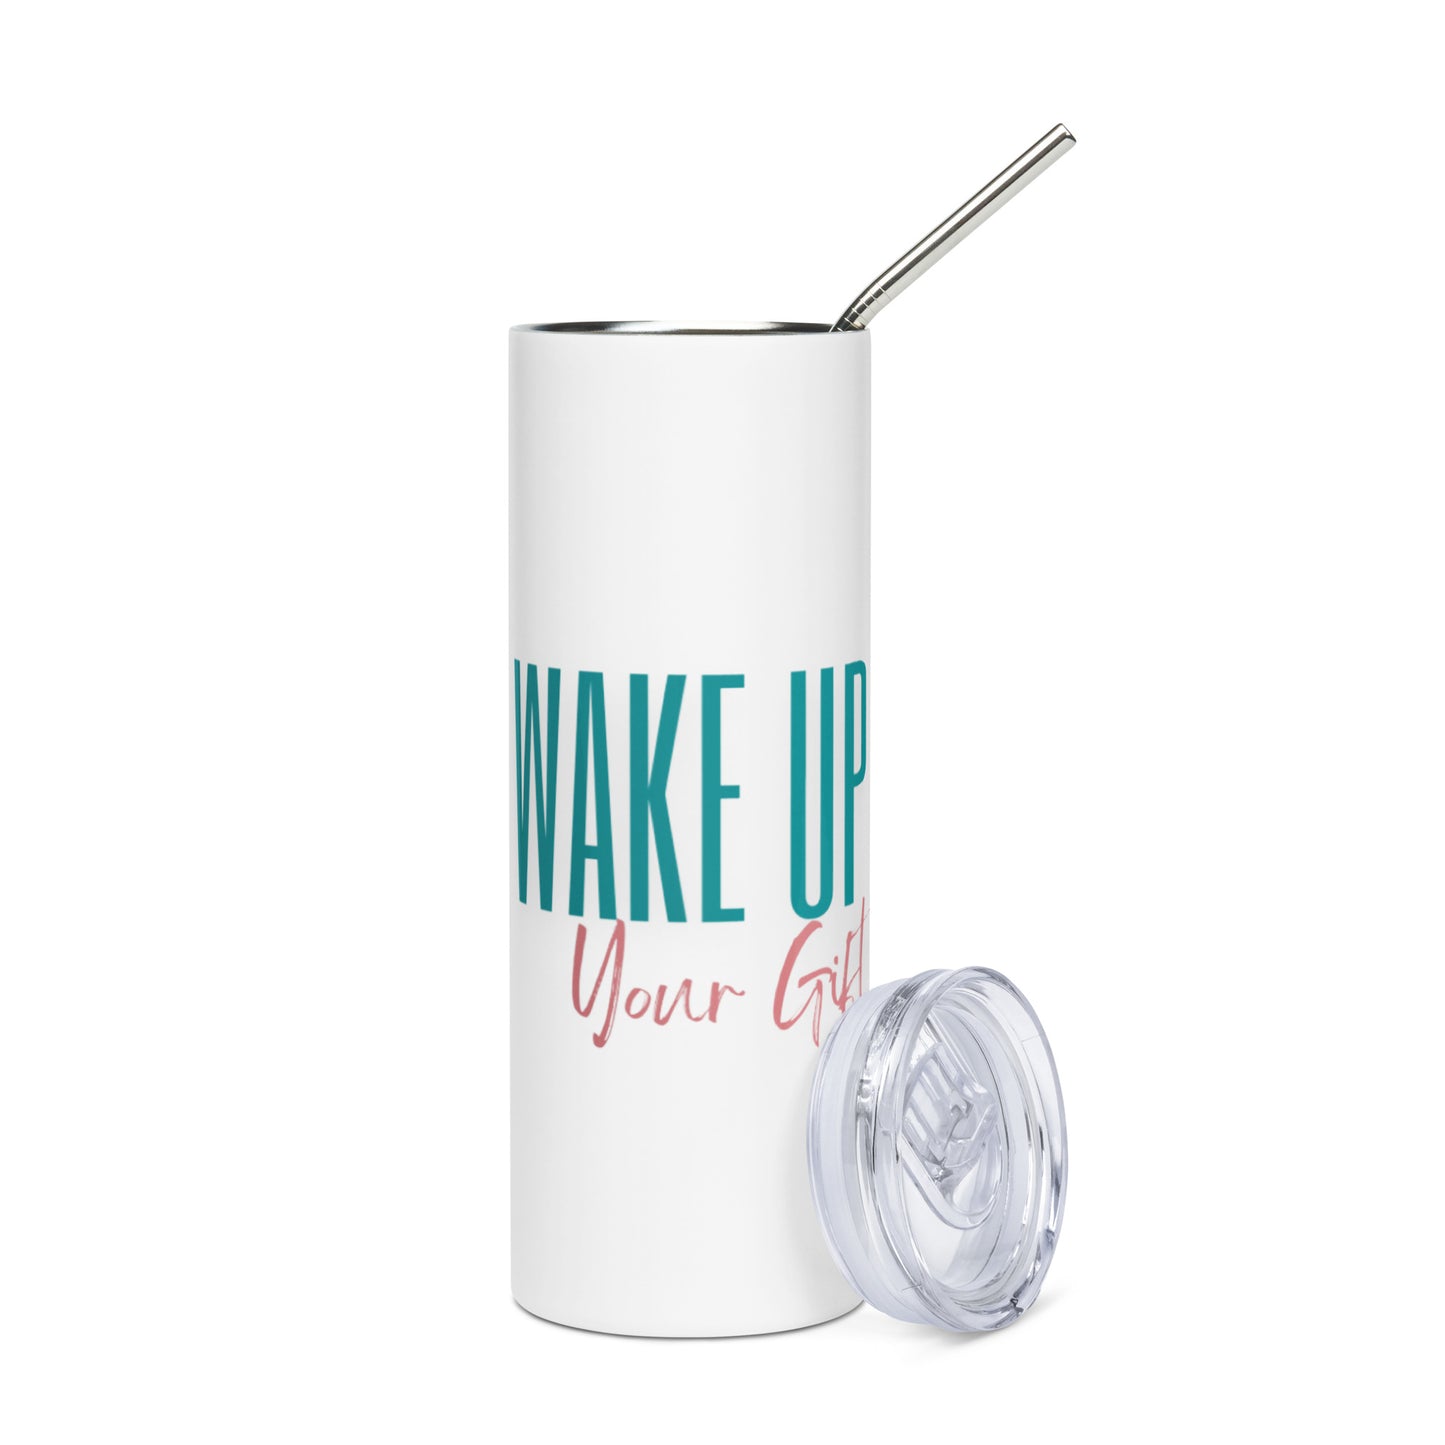 Wake Up Your Gift Stainless steel tumbler